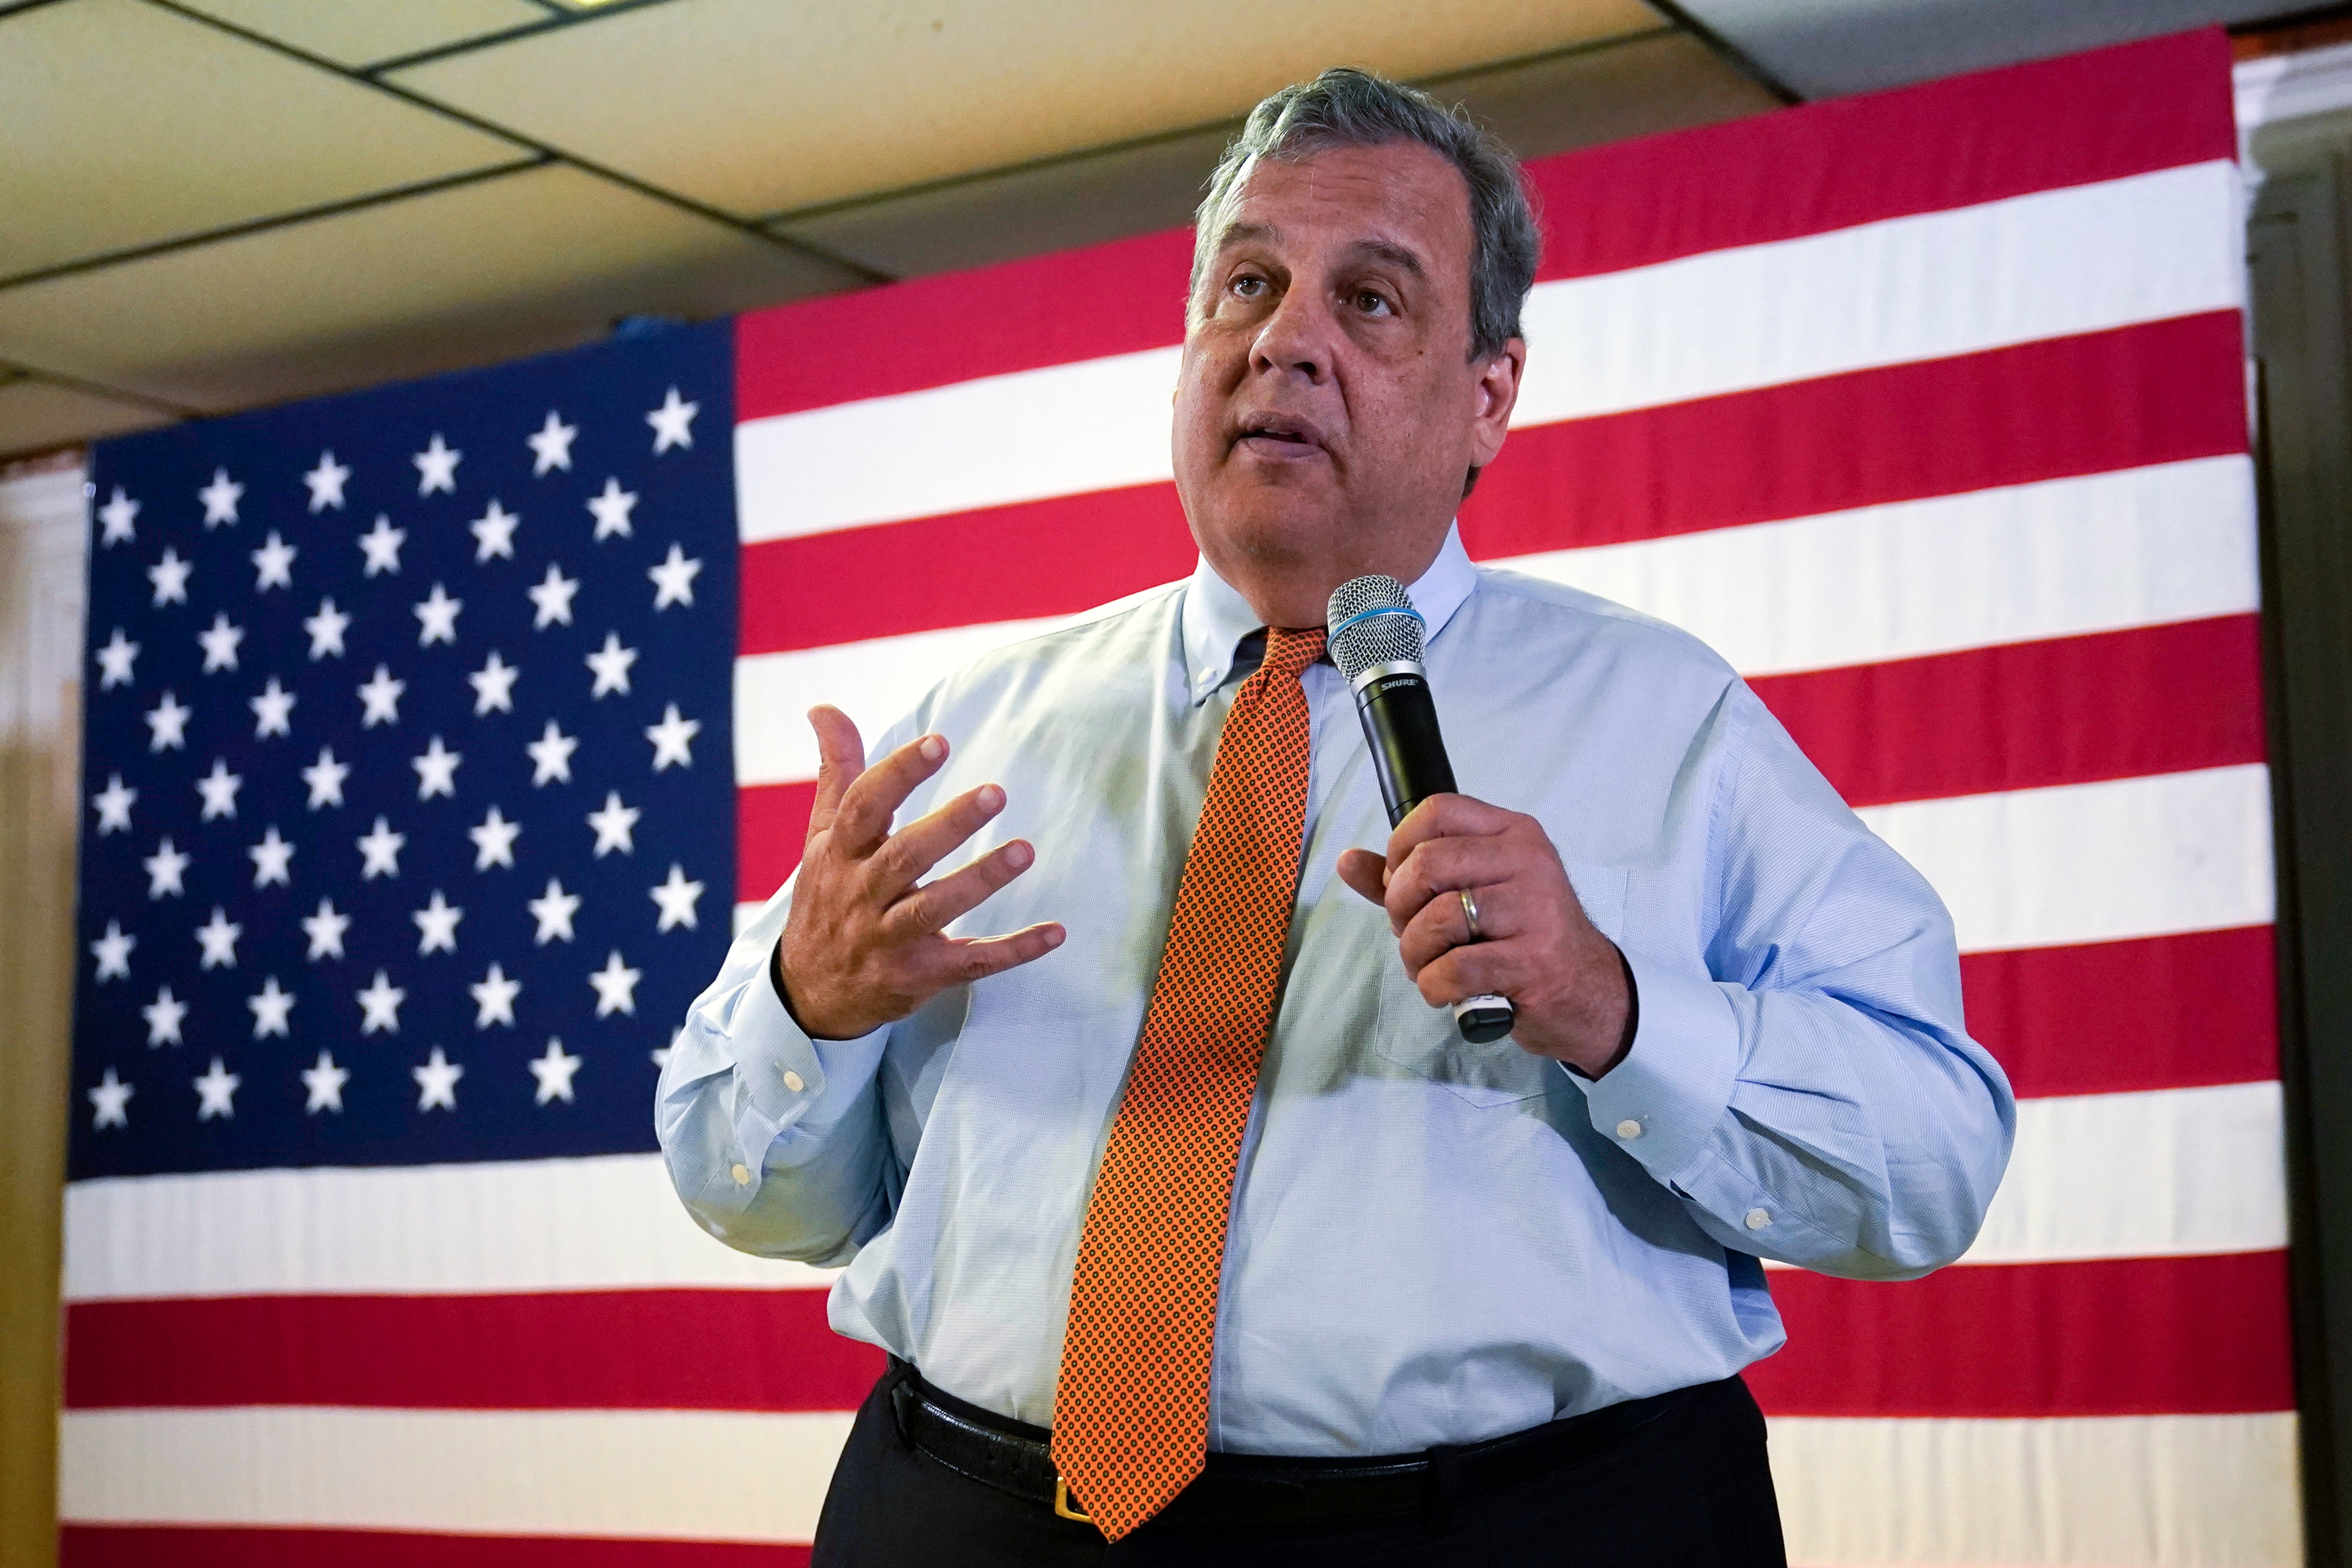 Christie battled teachers’ unions during his time in office